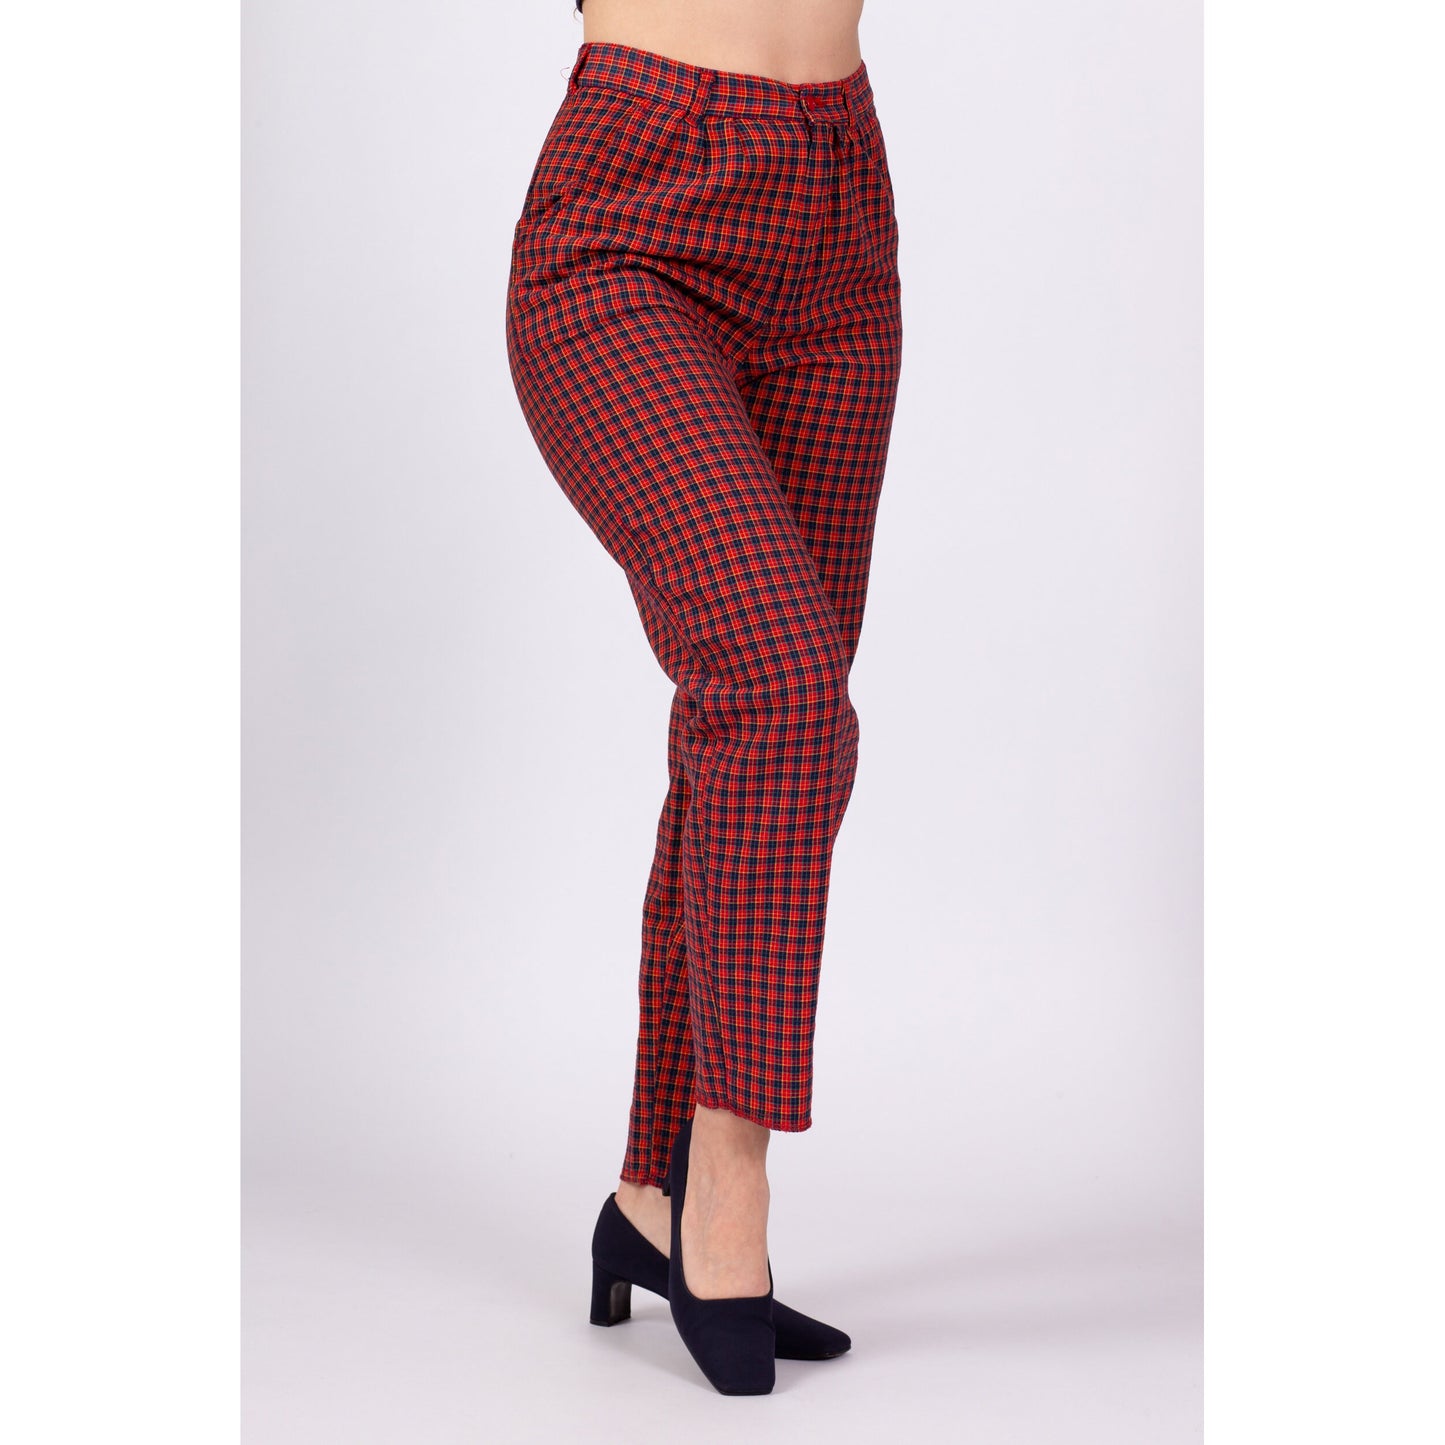 Tapered Checkered Trousers 80s Pleated Pants High Waisted Rise Pants Retro  Plaid Preppy Slacks Punk Chic Vintage 1980s Small S 26 